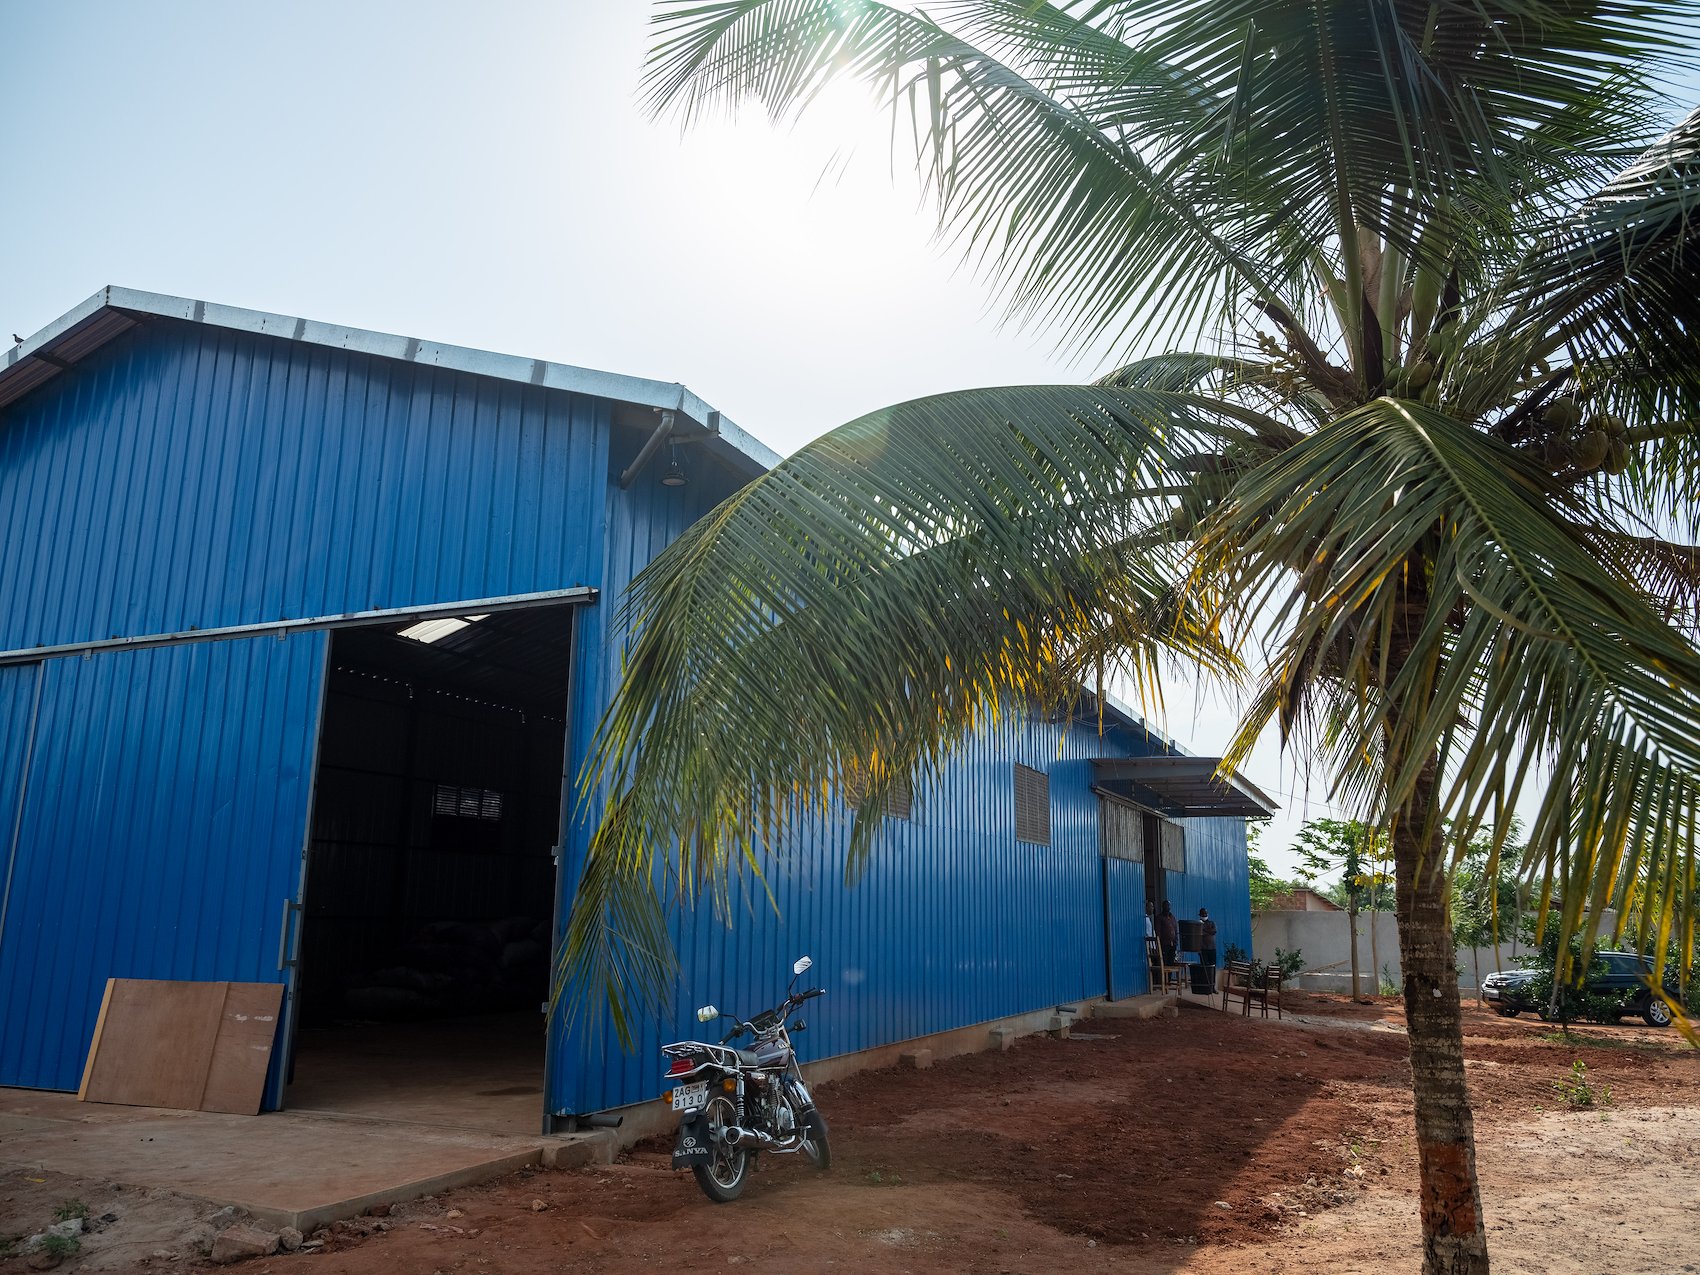 This warehouse in Benin is owned by Natura, a shea butter producer.